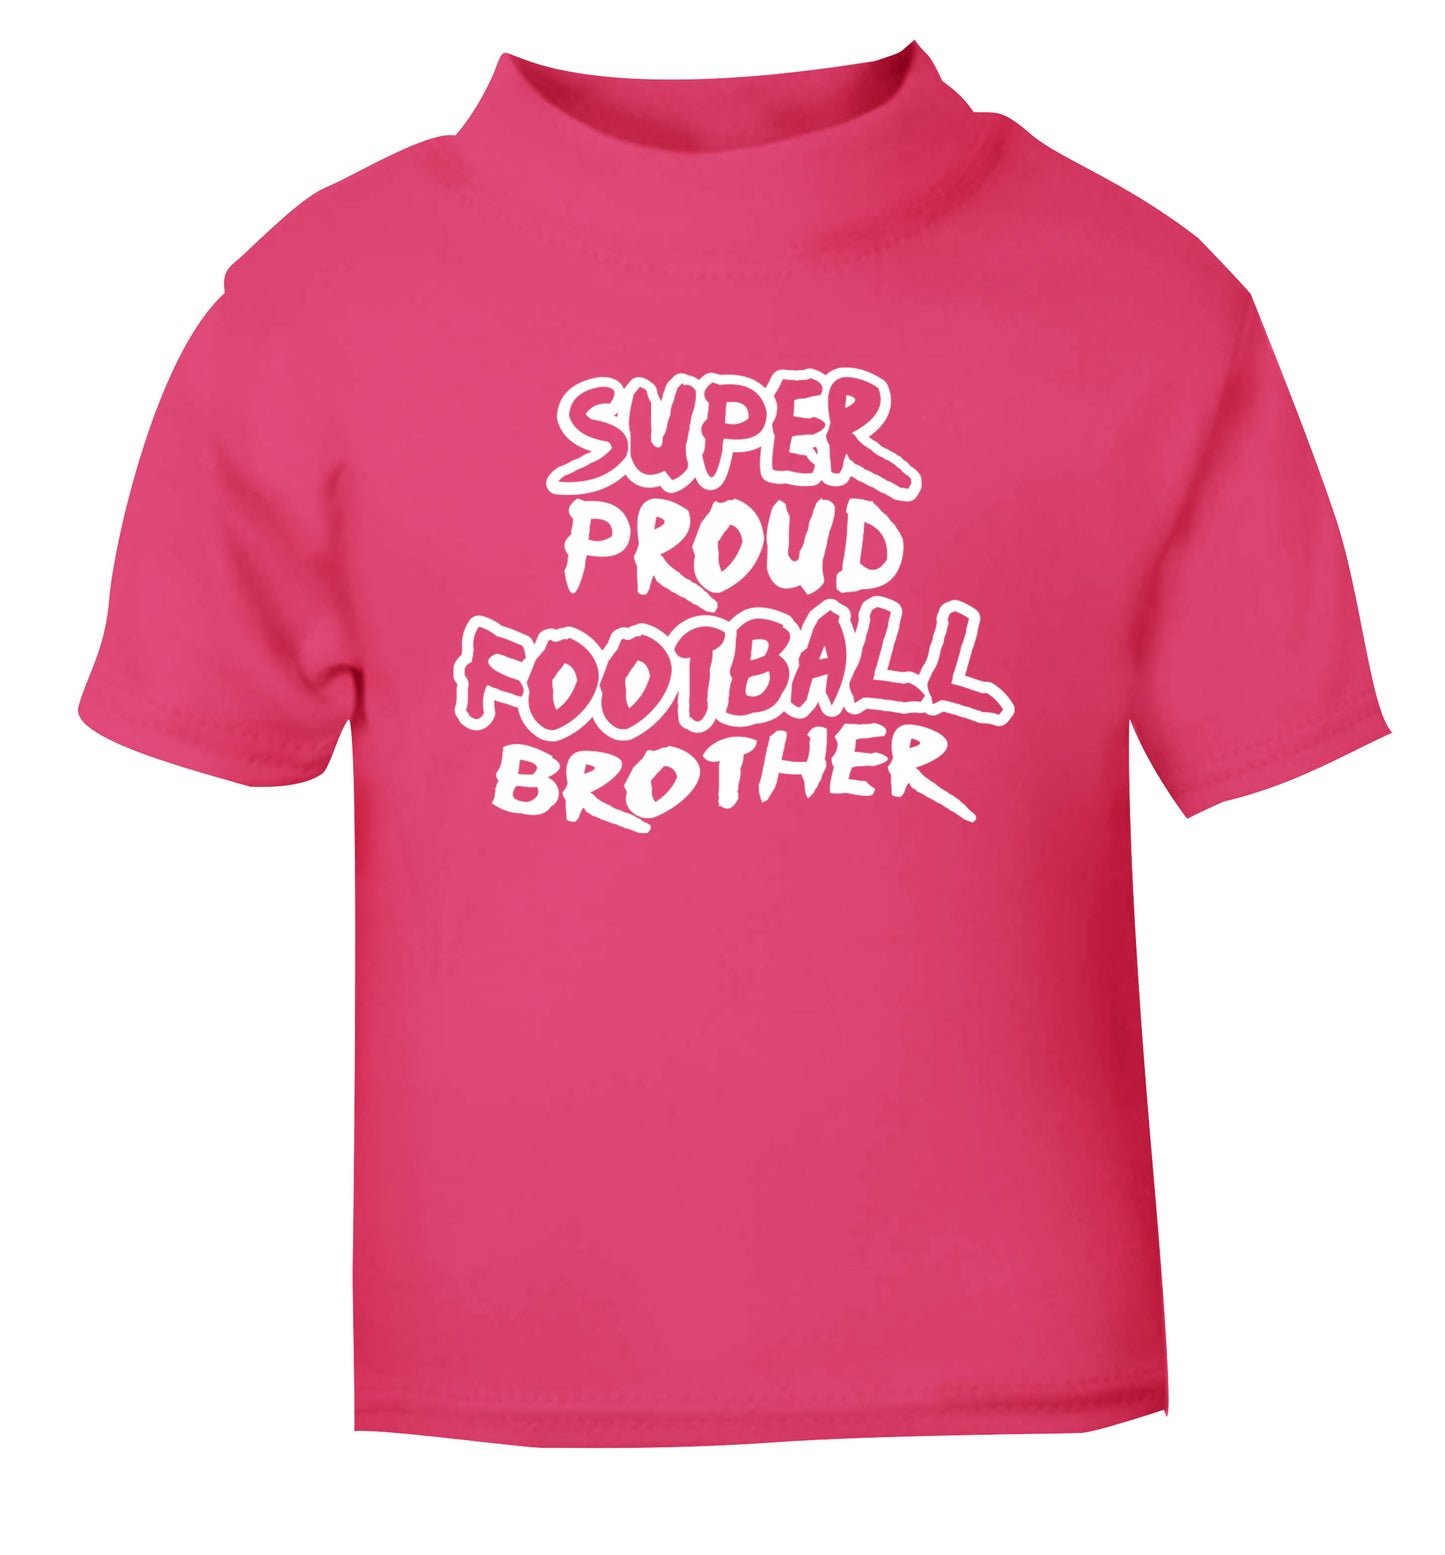 Super proud football brother pink Baby Toddler Tshirt 2 Years